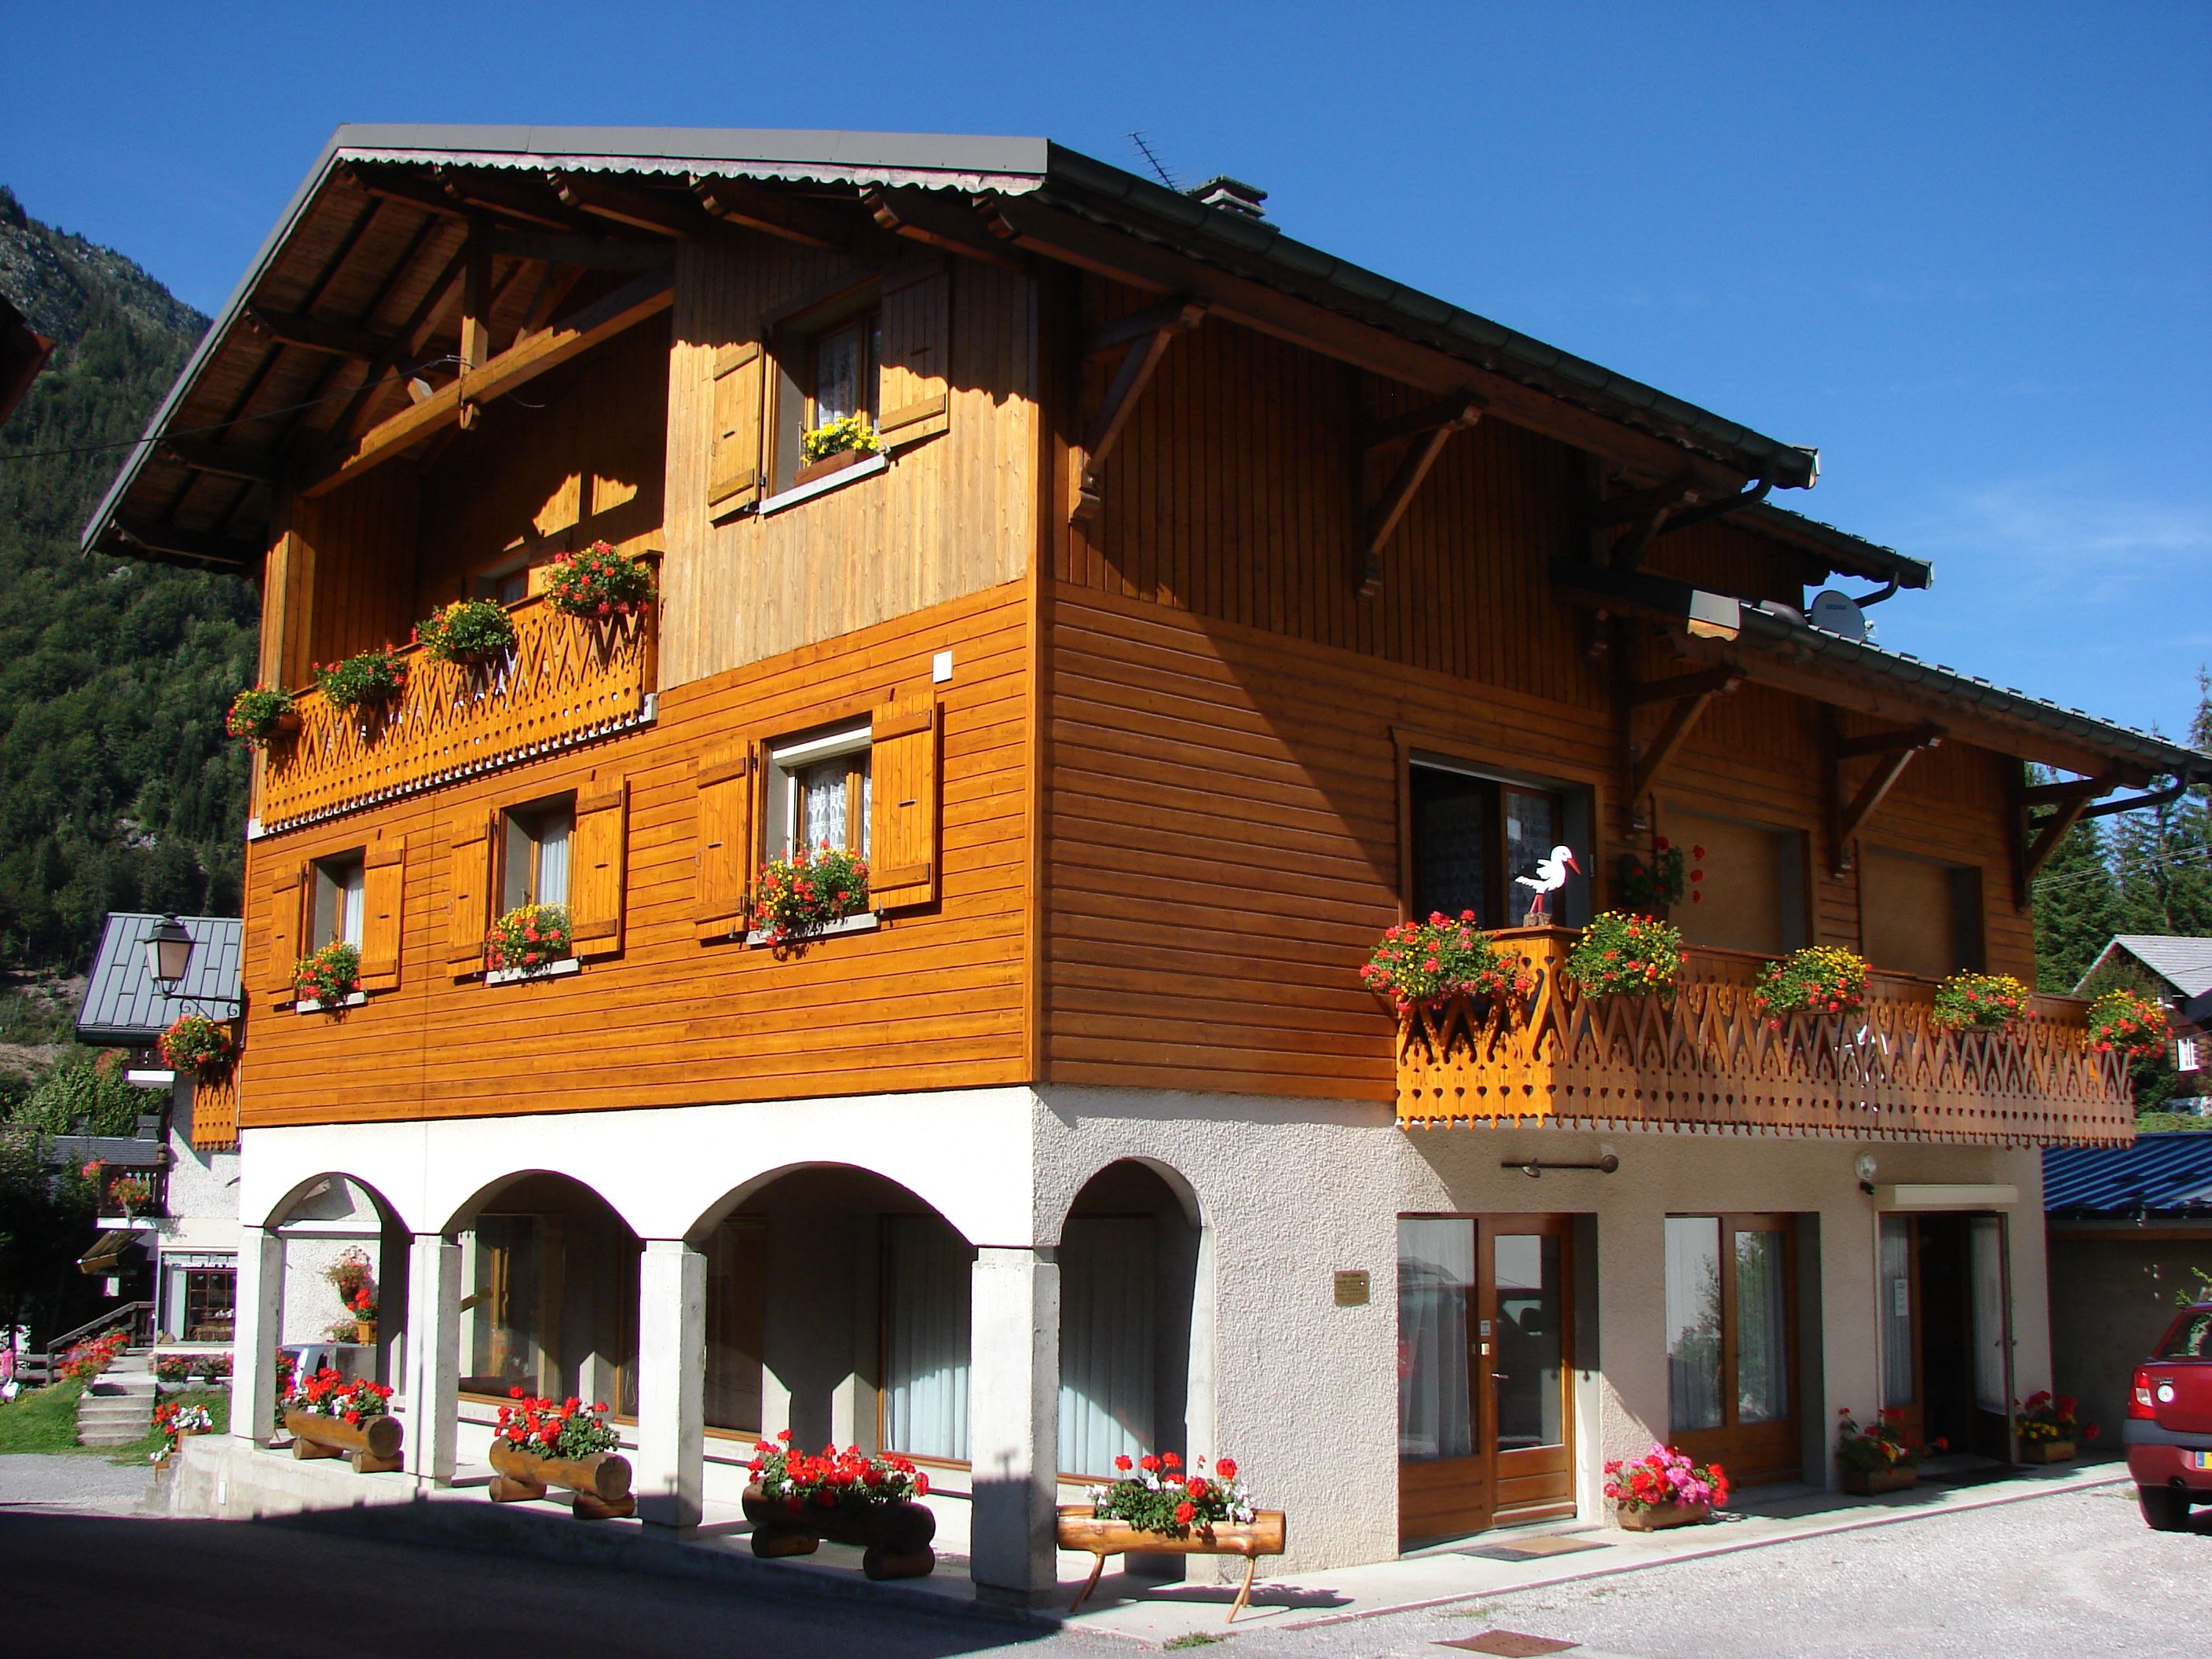 Apartment in chalet - 26m² - 1 bedroom - Favre-Rochex Jean-Louis